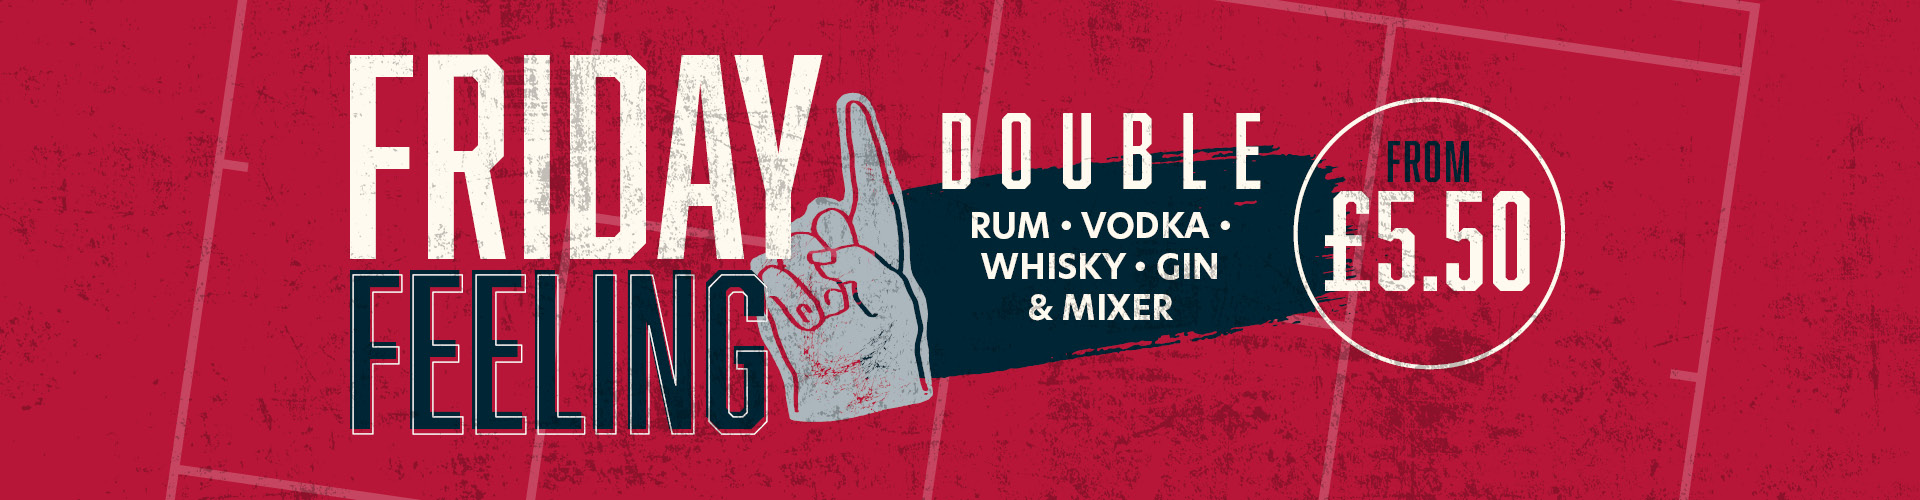 Friday Feeling - Double rum vodka whisky gin & mixer - from 5.50